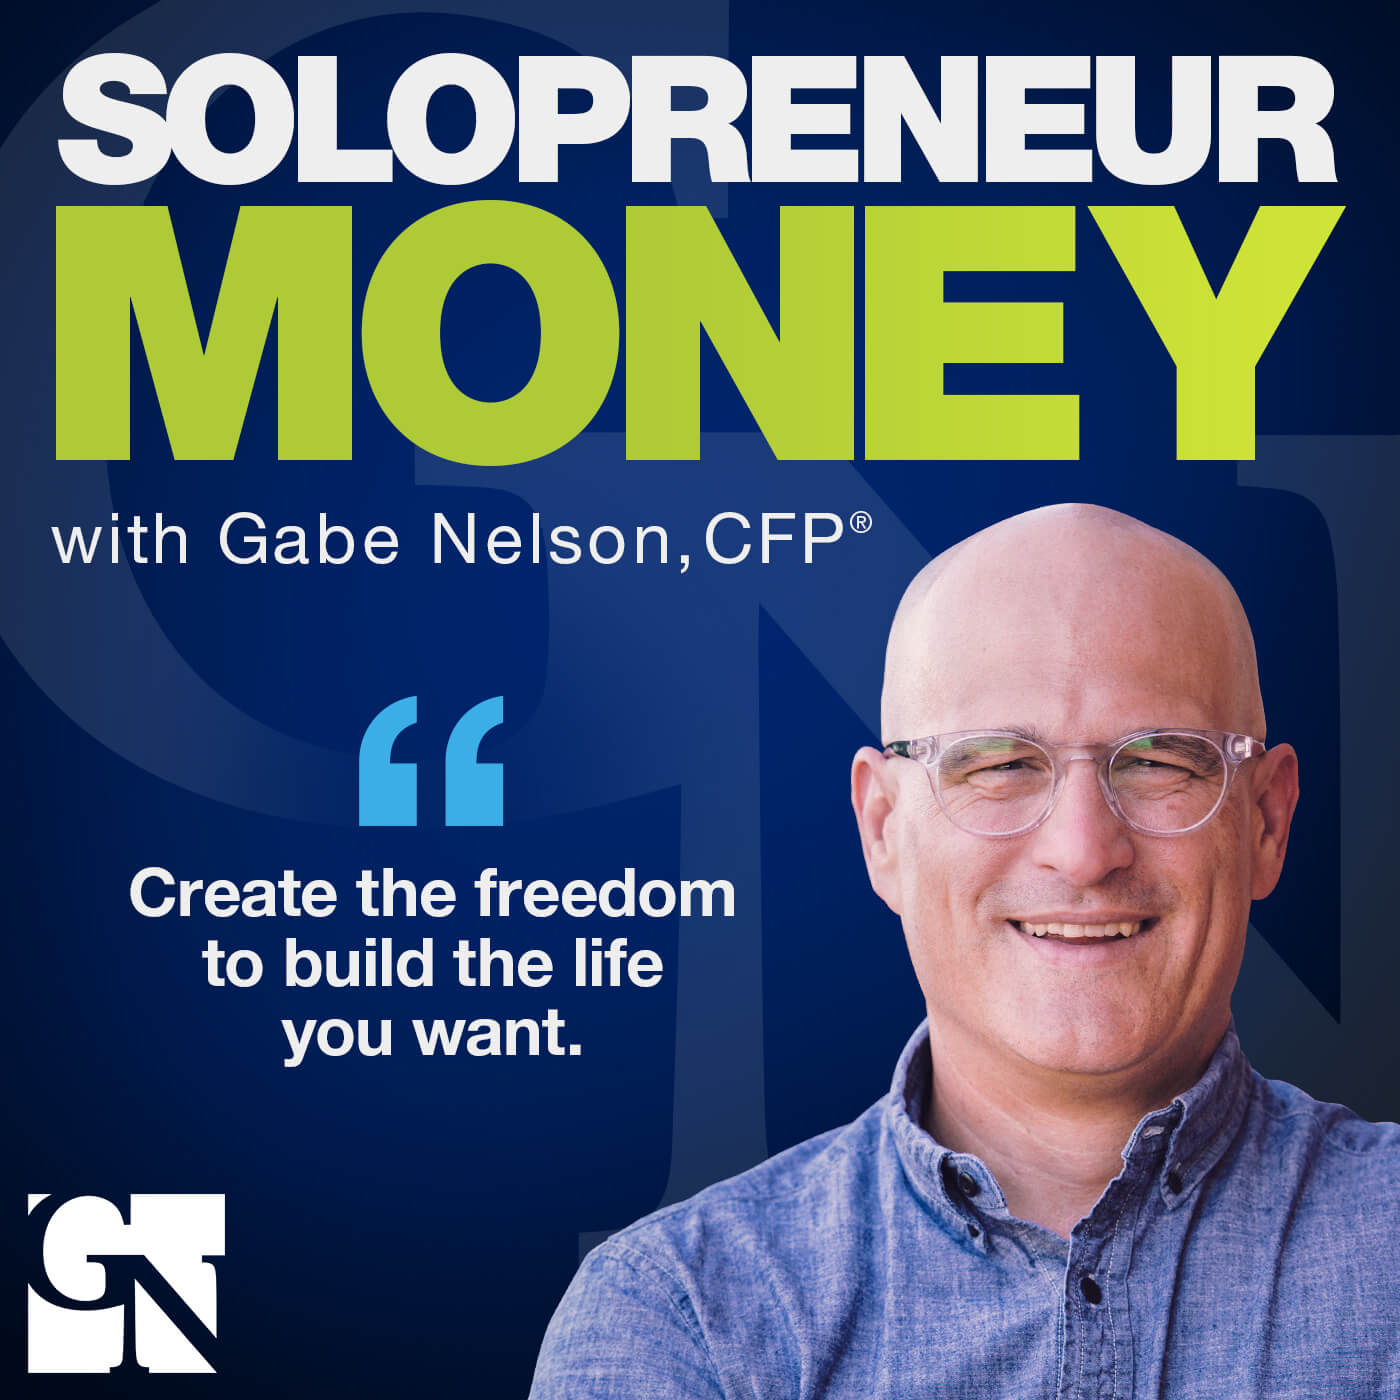 We are happy to provide PODCAST EDITING AND SHOW NOTES for Gabe Nelson